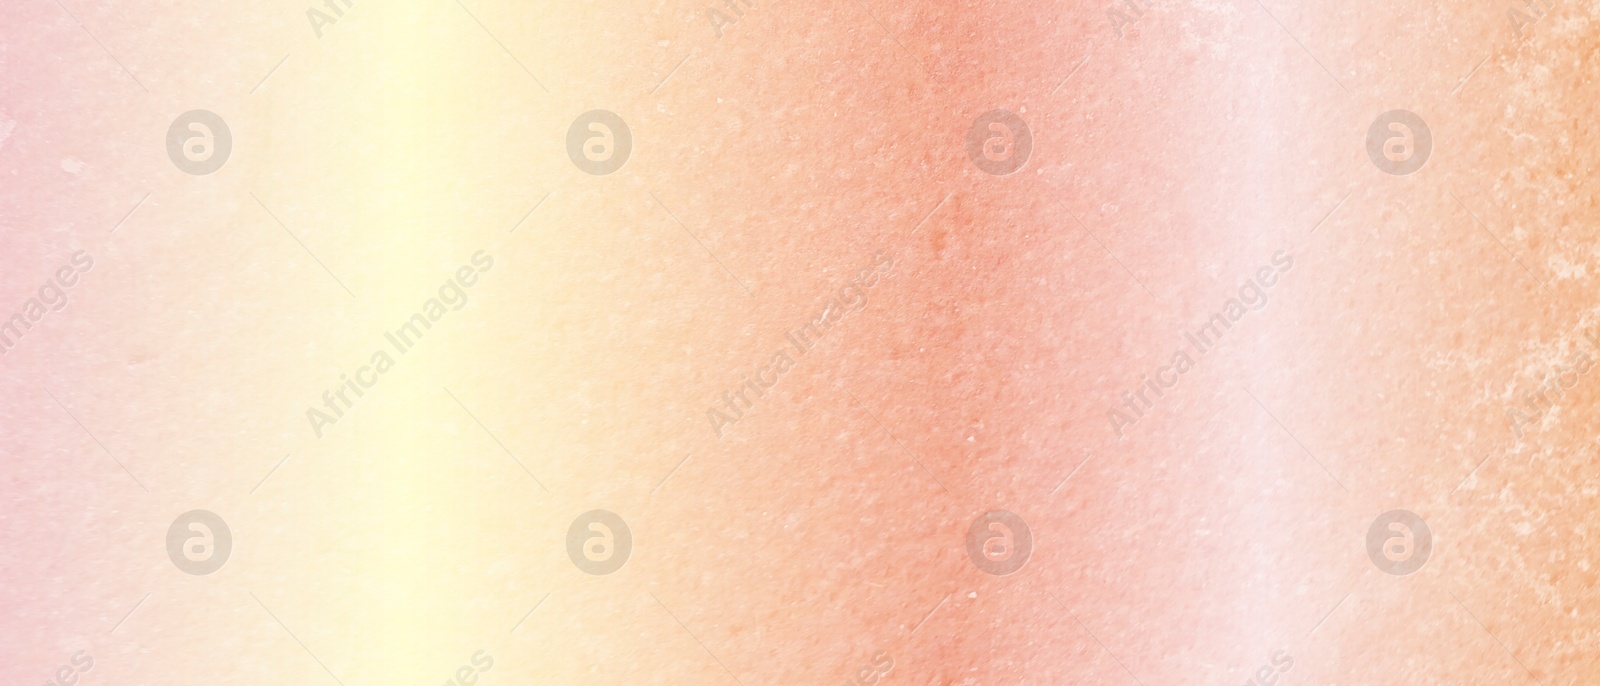 Image of Rose gold surface as background, closeup view